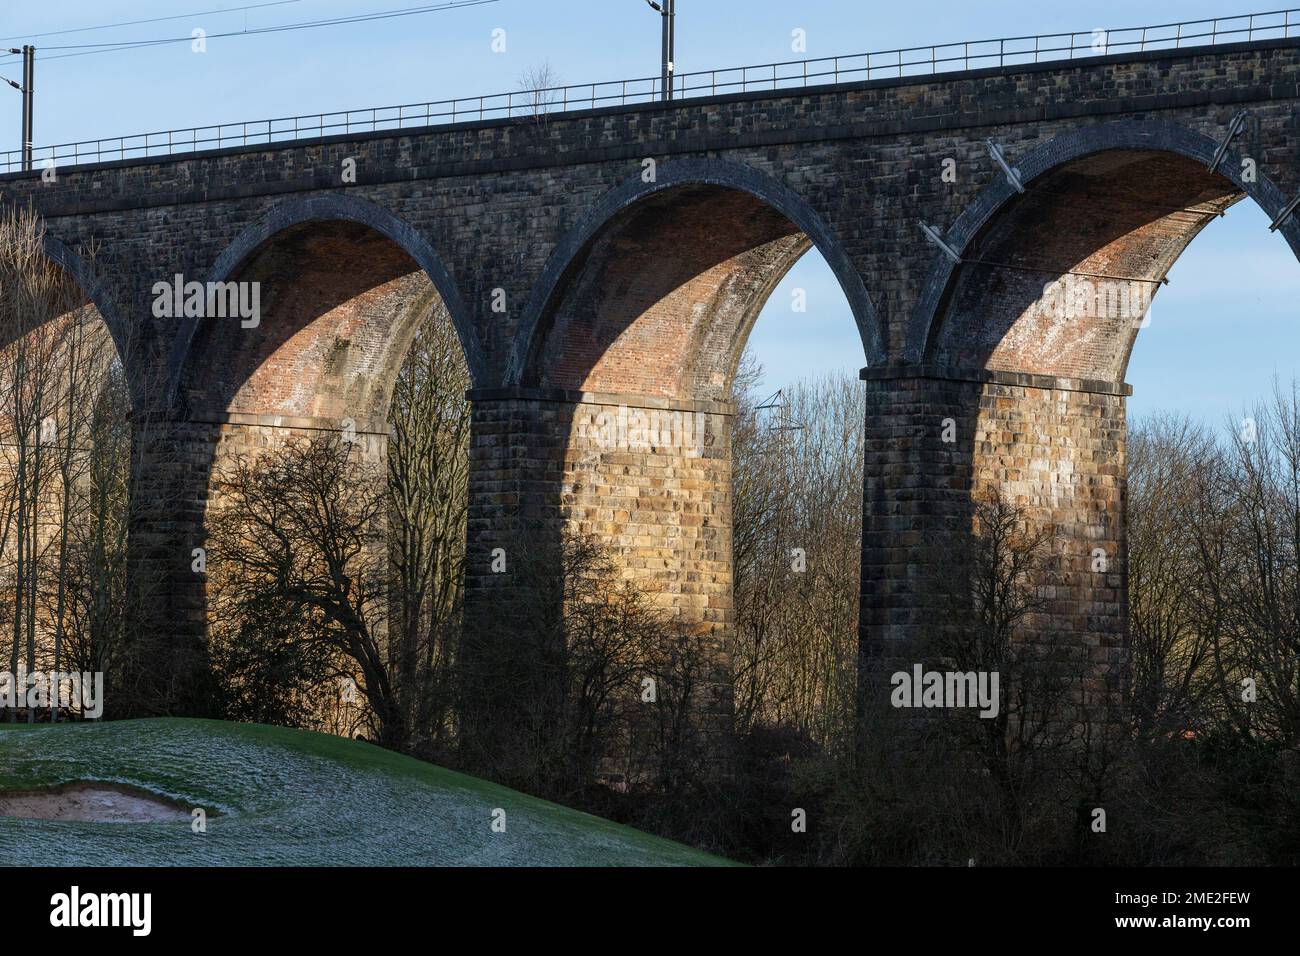 The middle section of a viaduct in Baildon, Yorkshire. The viaduct carries the Wharfedale Railway Line which connects Ilkley with Bradford. Stock Photo